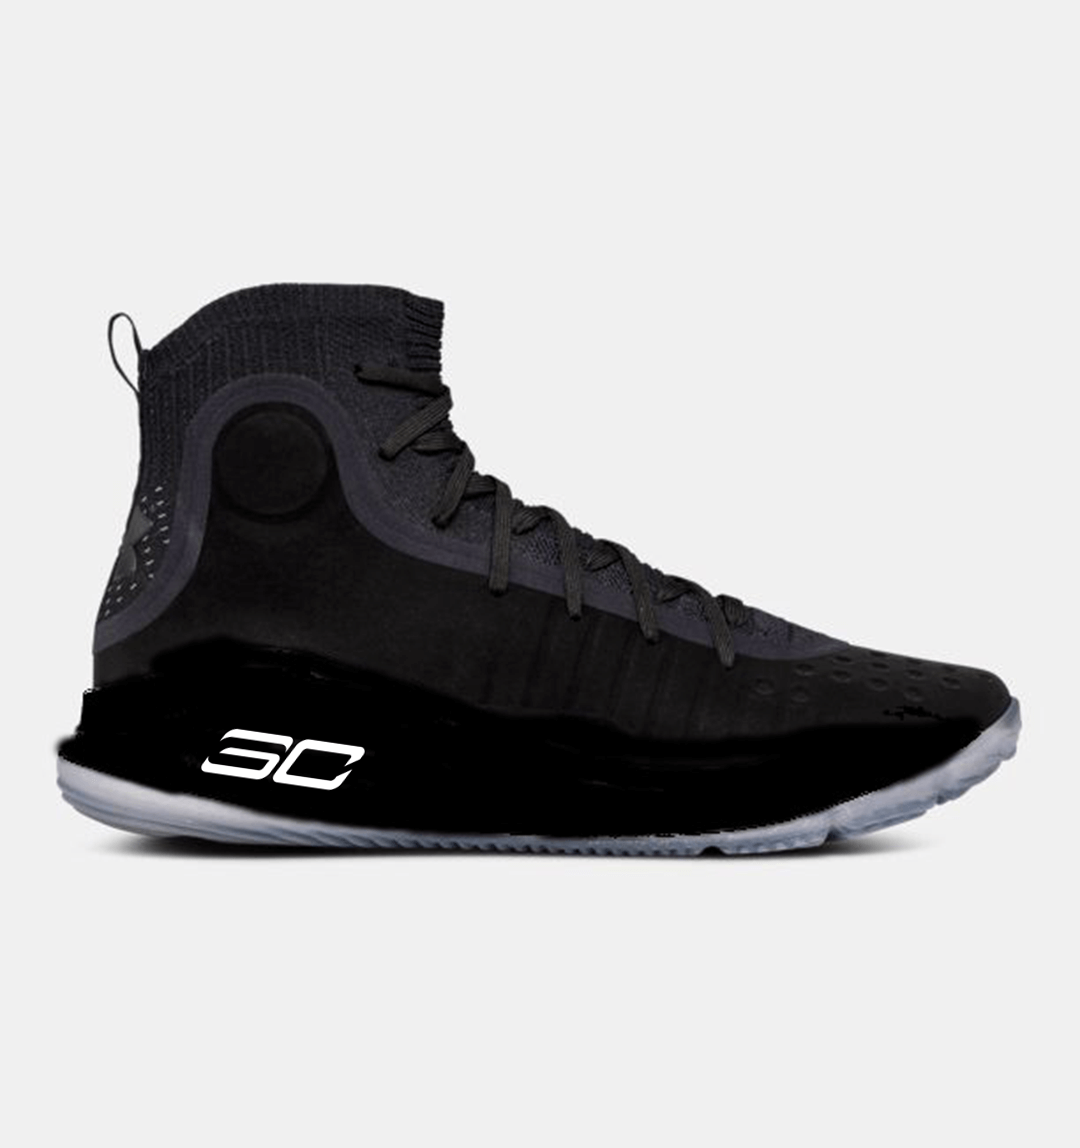 The Top 40 Sneakers of 2017 | #10 Under Armour Curry 4 – ARCH-USA